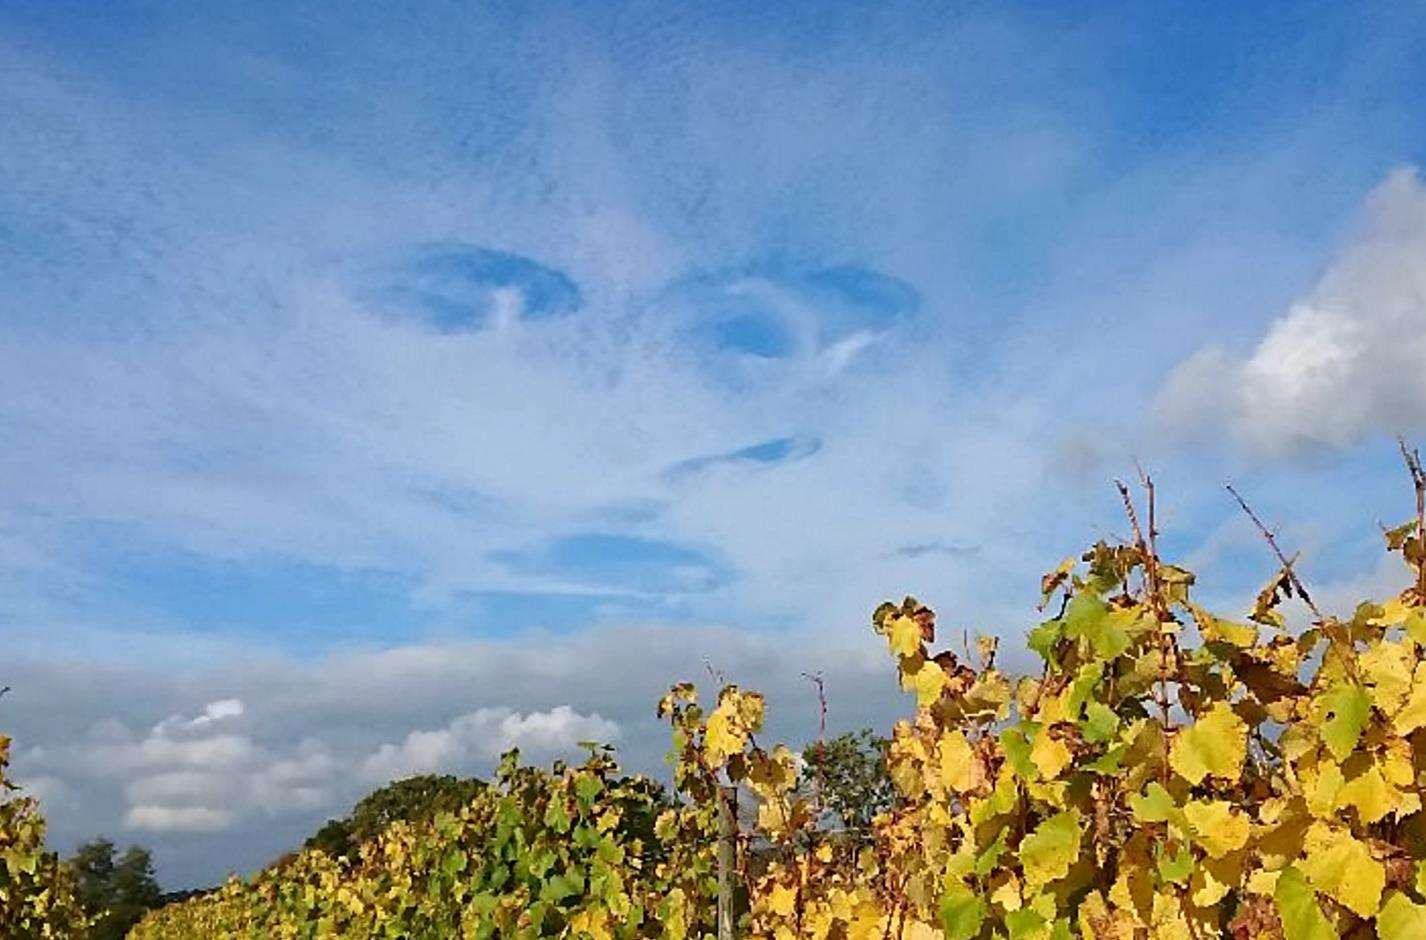 A face peering over Sandhurst Vineyards in Kent. Picture: SWNS (4867460)